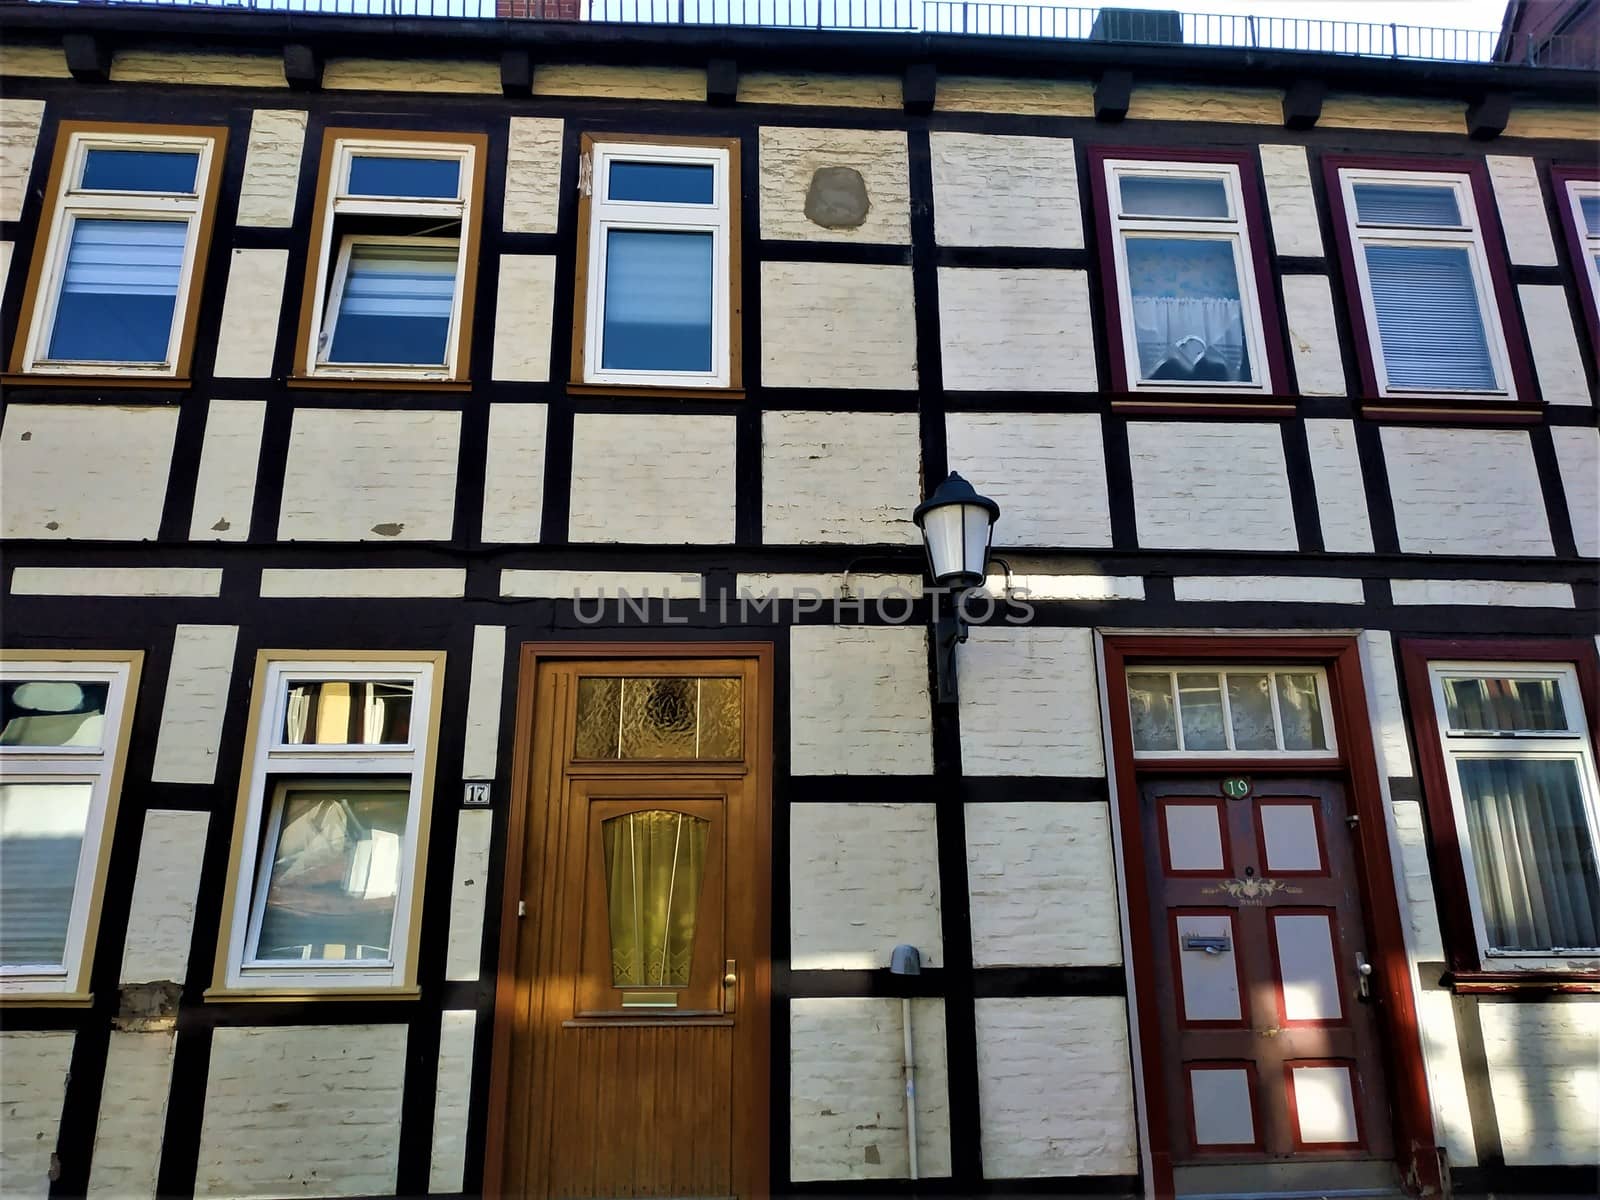 Beautiful houses with picturesque doors and windows in Einbeck, Germany